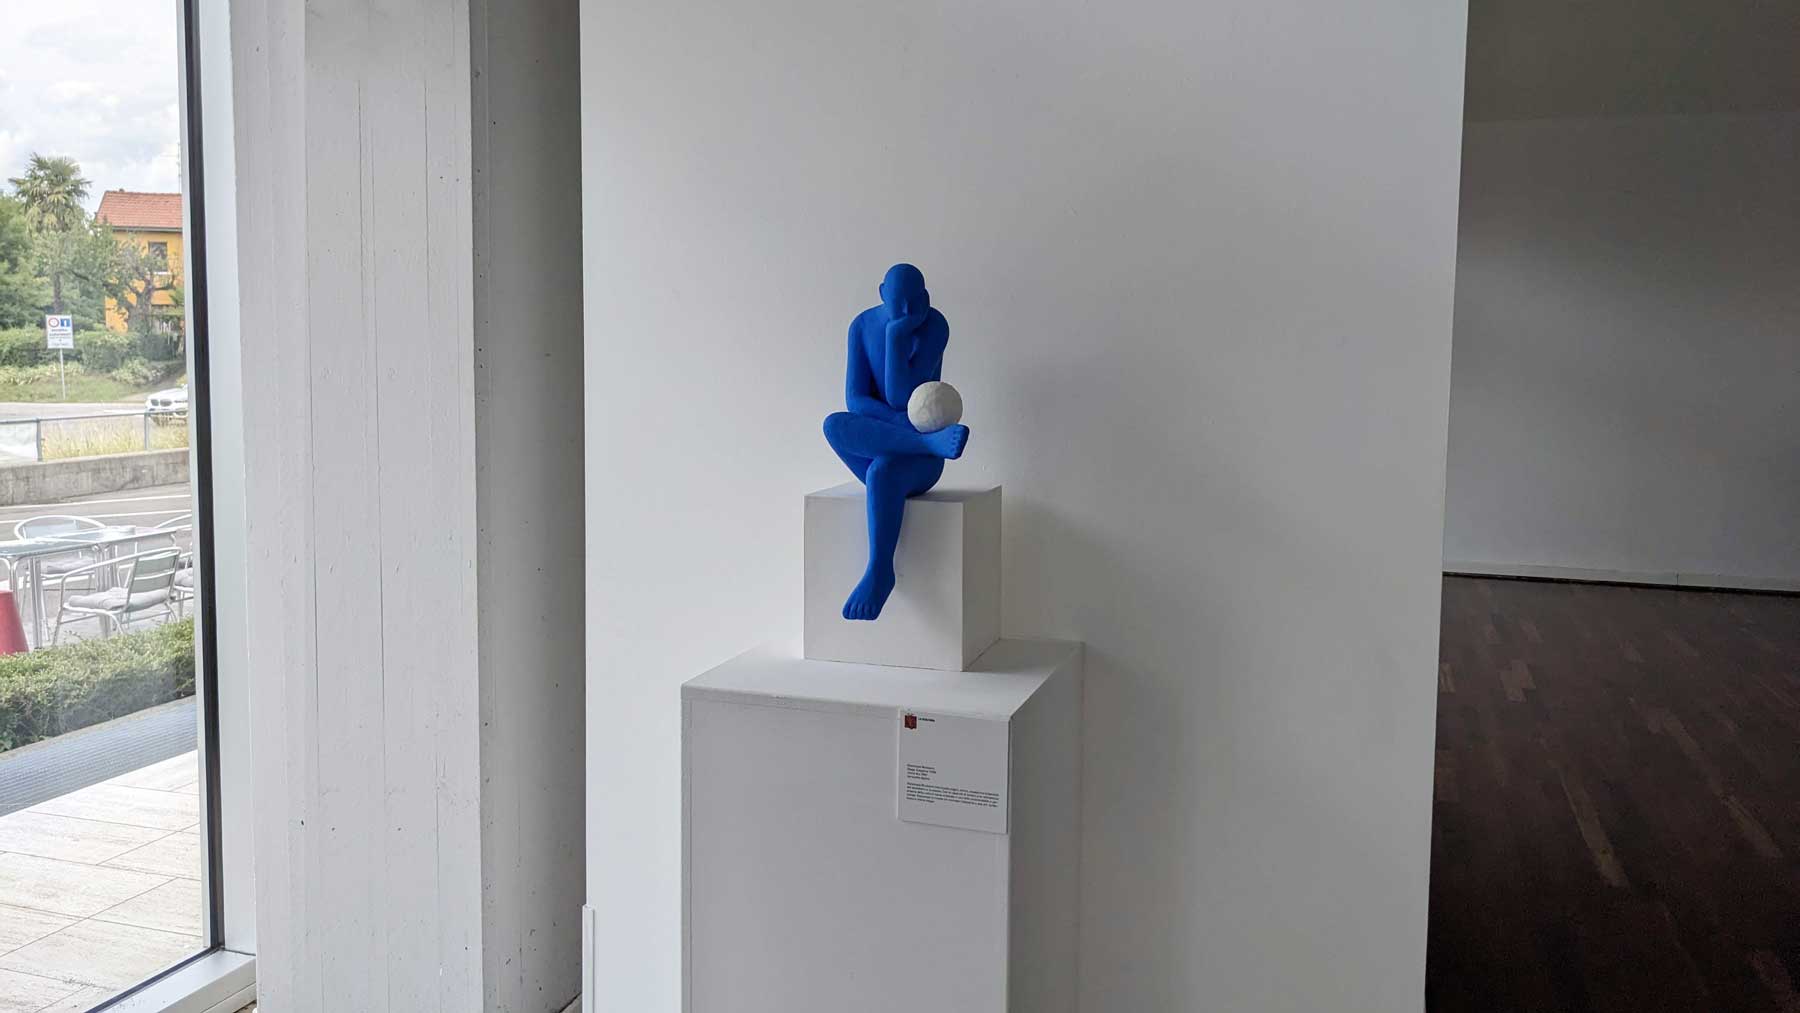 A blue seated human figure looking sideways at a white sphere, Kazumasa Mizokami's 2001 work as it is displayed in this joint exhibition.